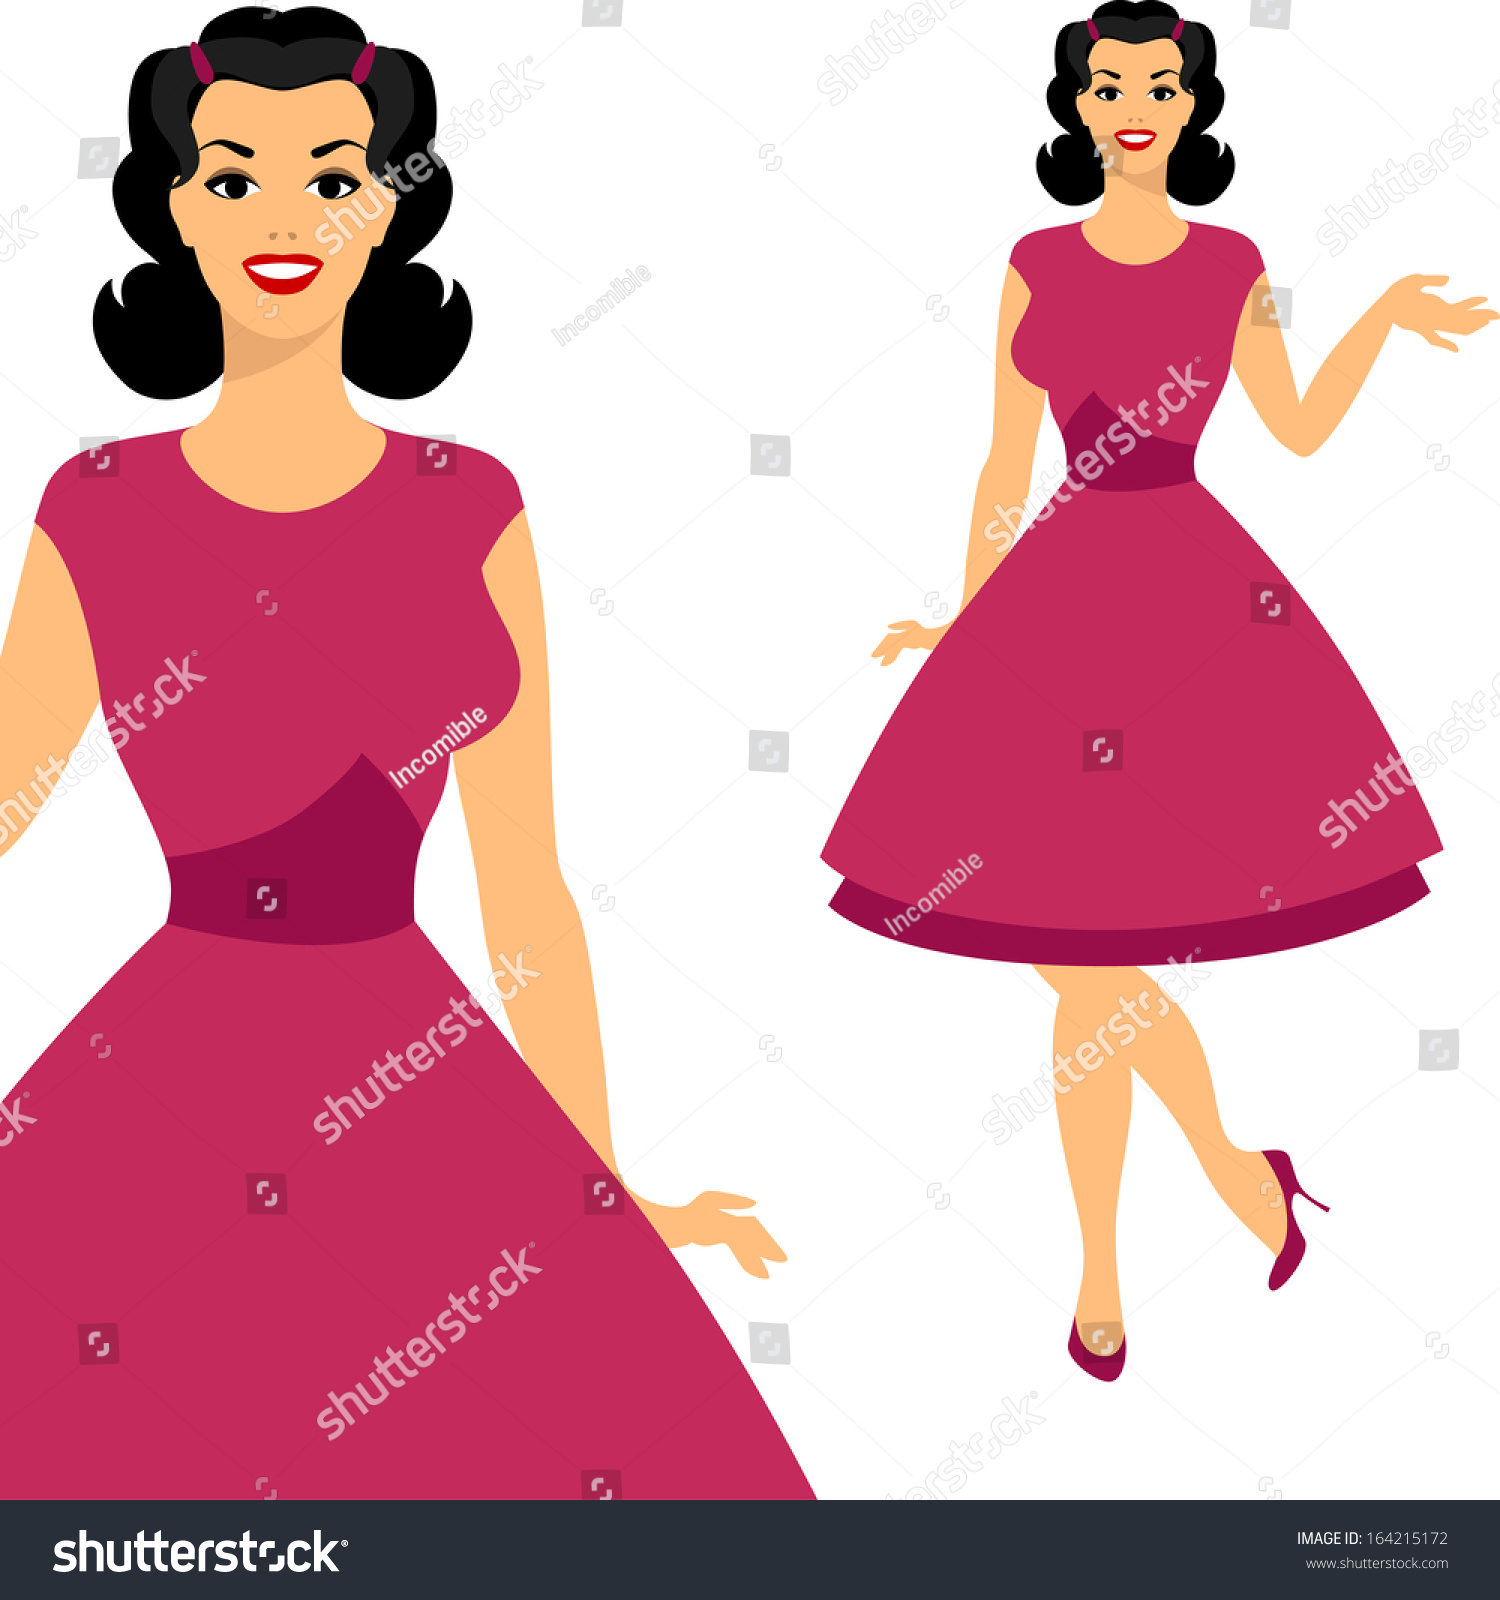 SVG of Beautiful pin up girl 1950s style. svg